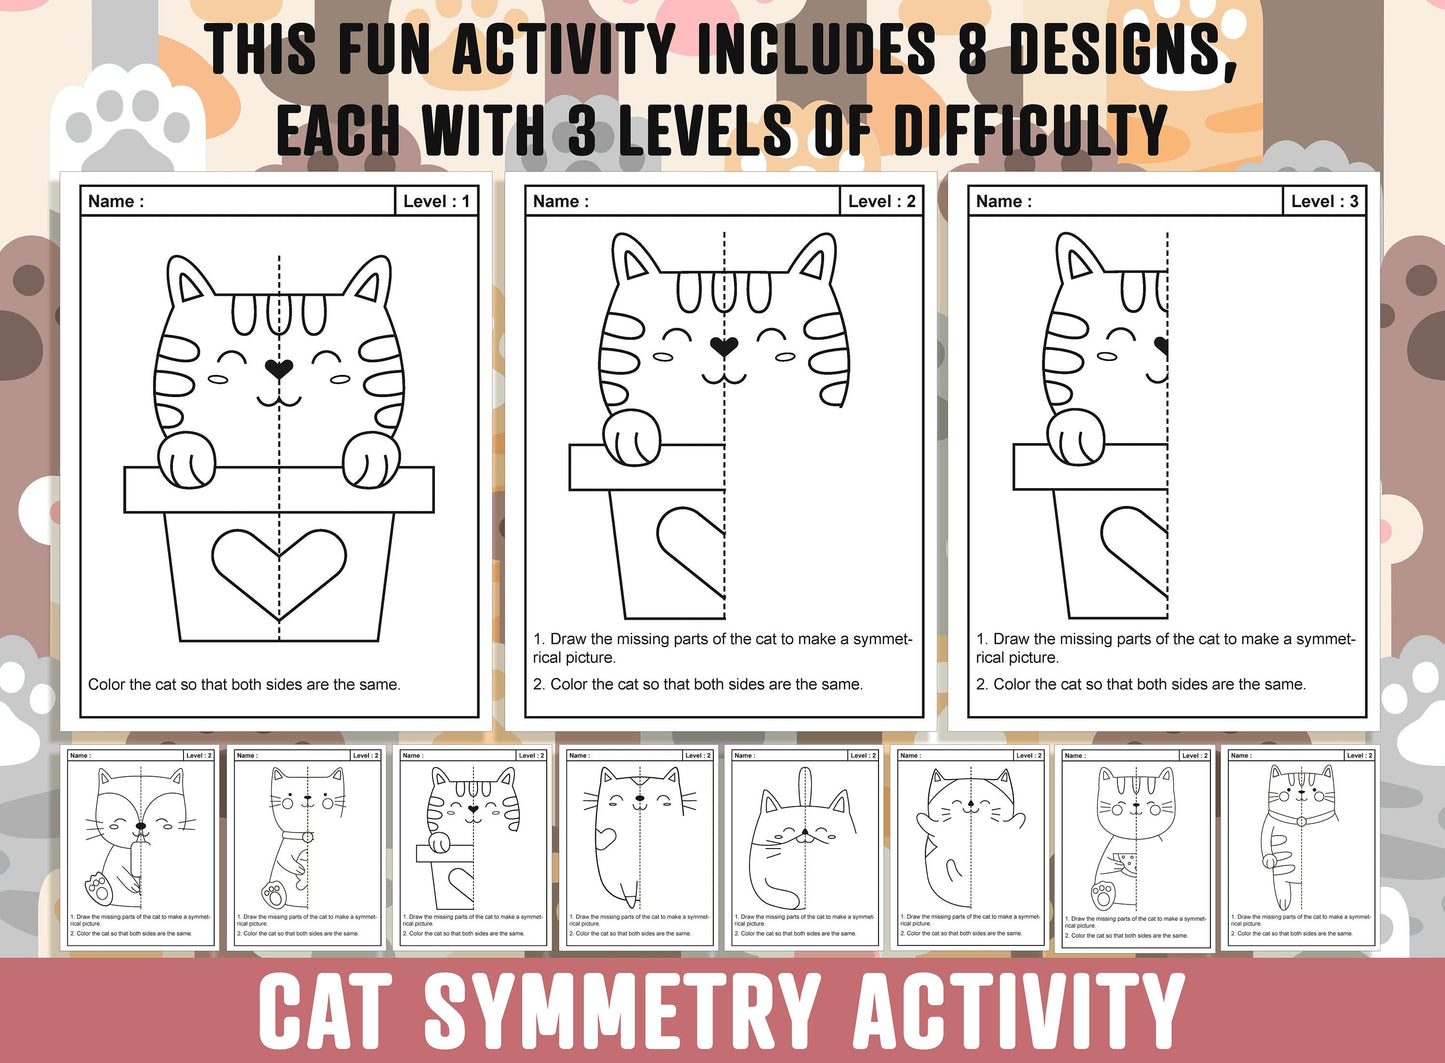 Cat Symmetry Worksheet, Kitten Theme Lines of Symmetry Activity, 24 Pages, Includes 8 Designs, Each With 3 Levels of Difficulty, Art & Math